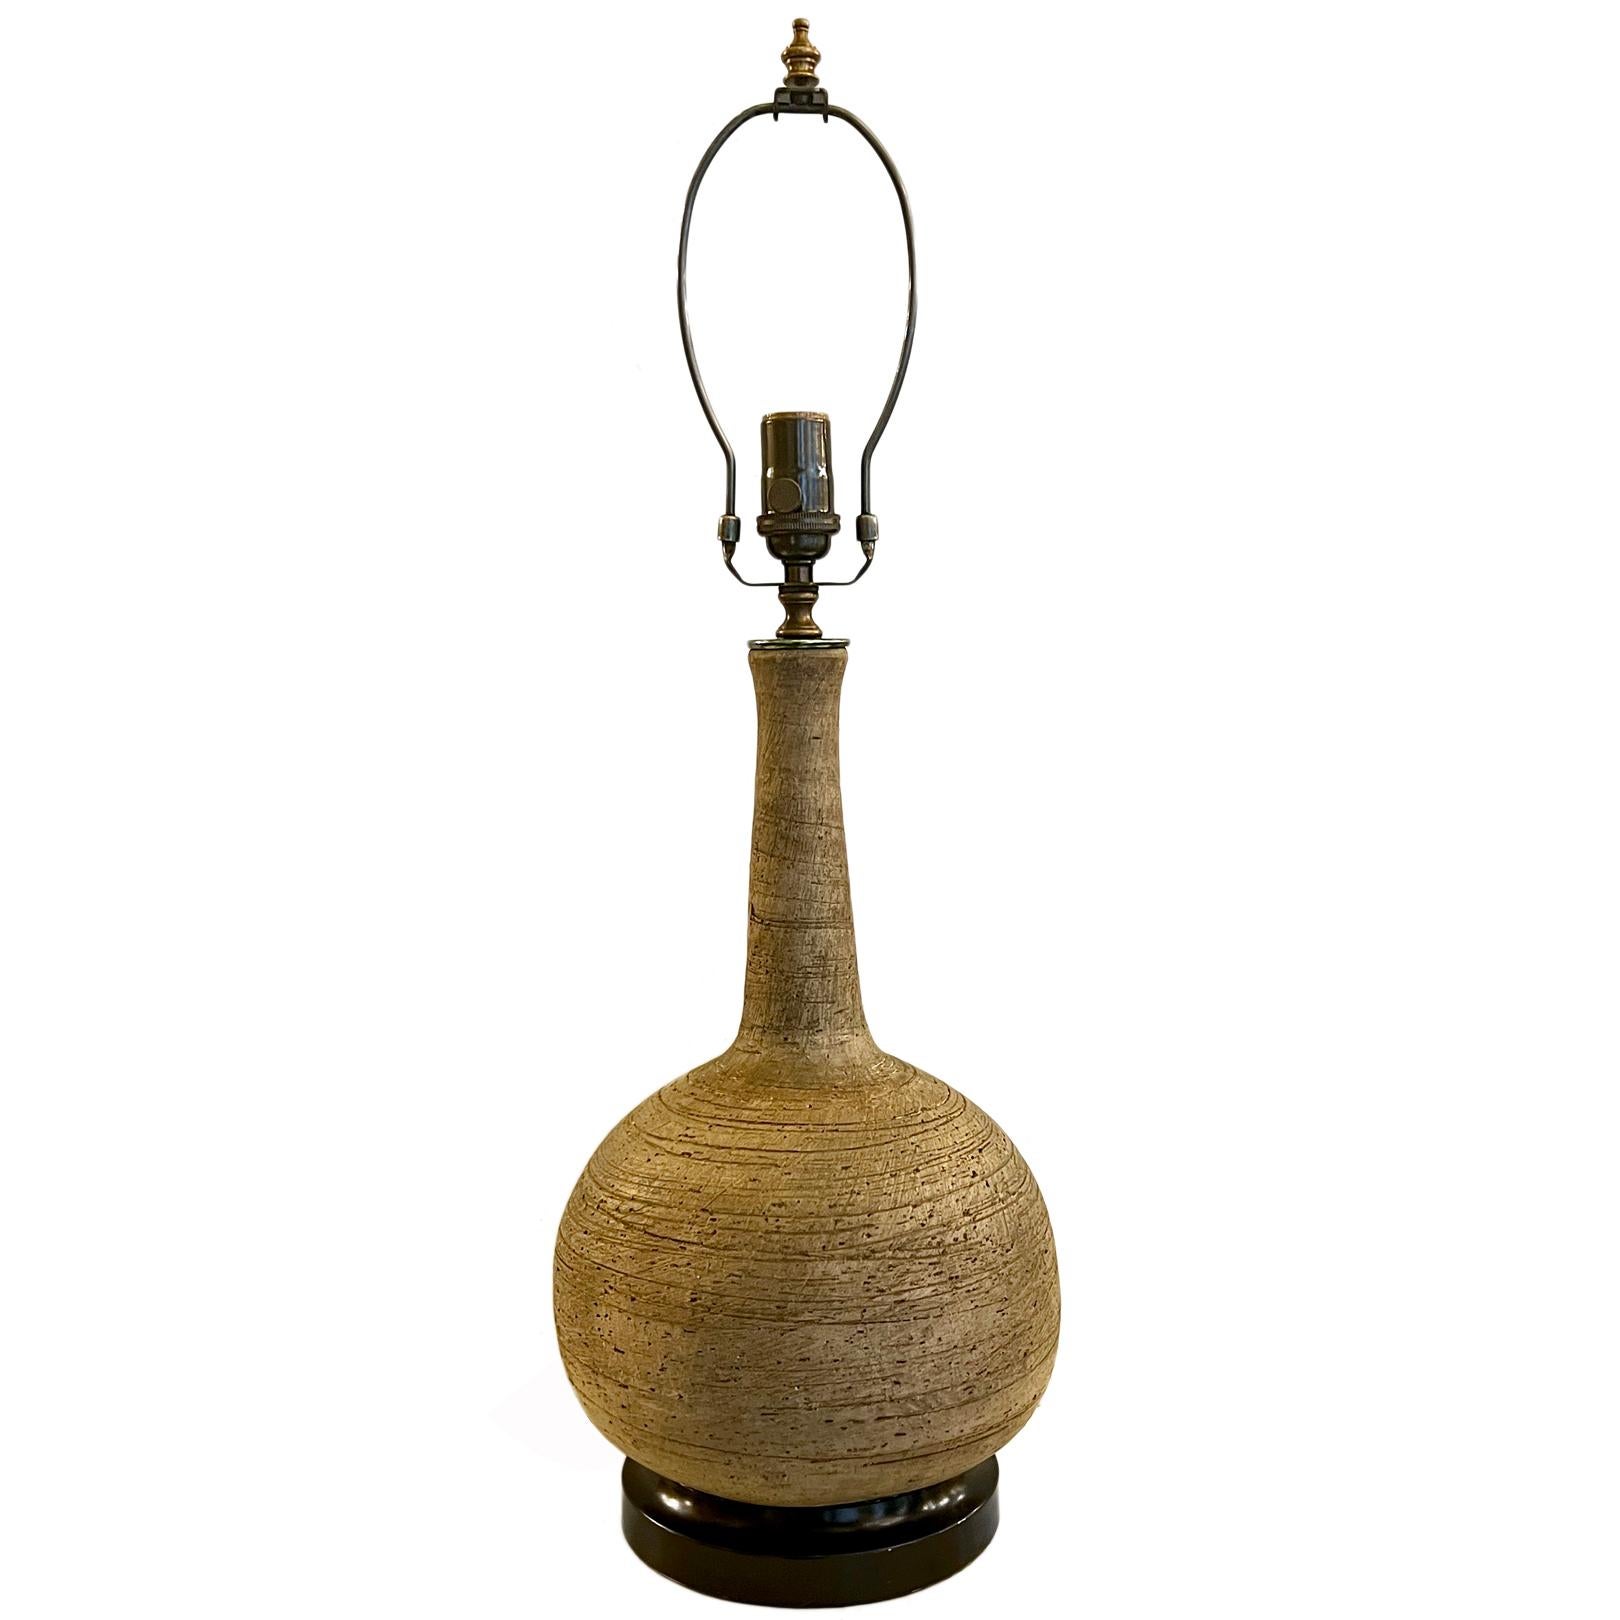 A circa 1950's Italian unglazed ceramic midcentury table lamp with wood base.

Measurements:
Height of body: 17